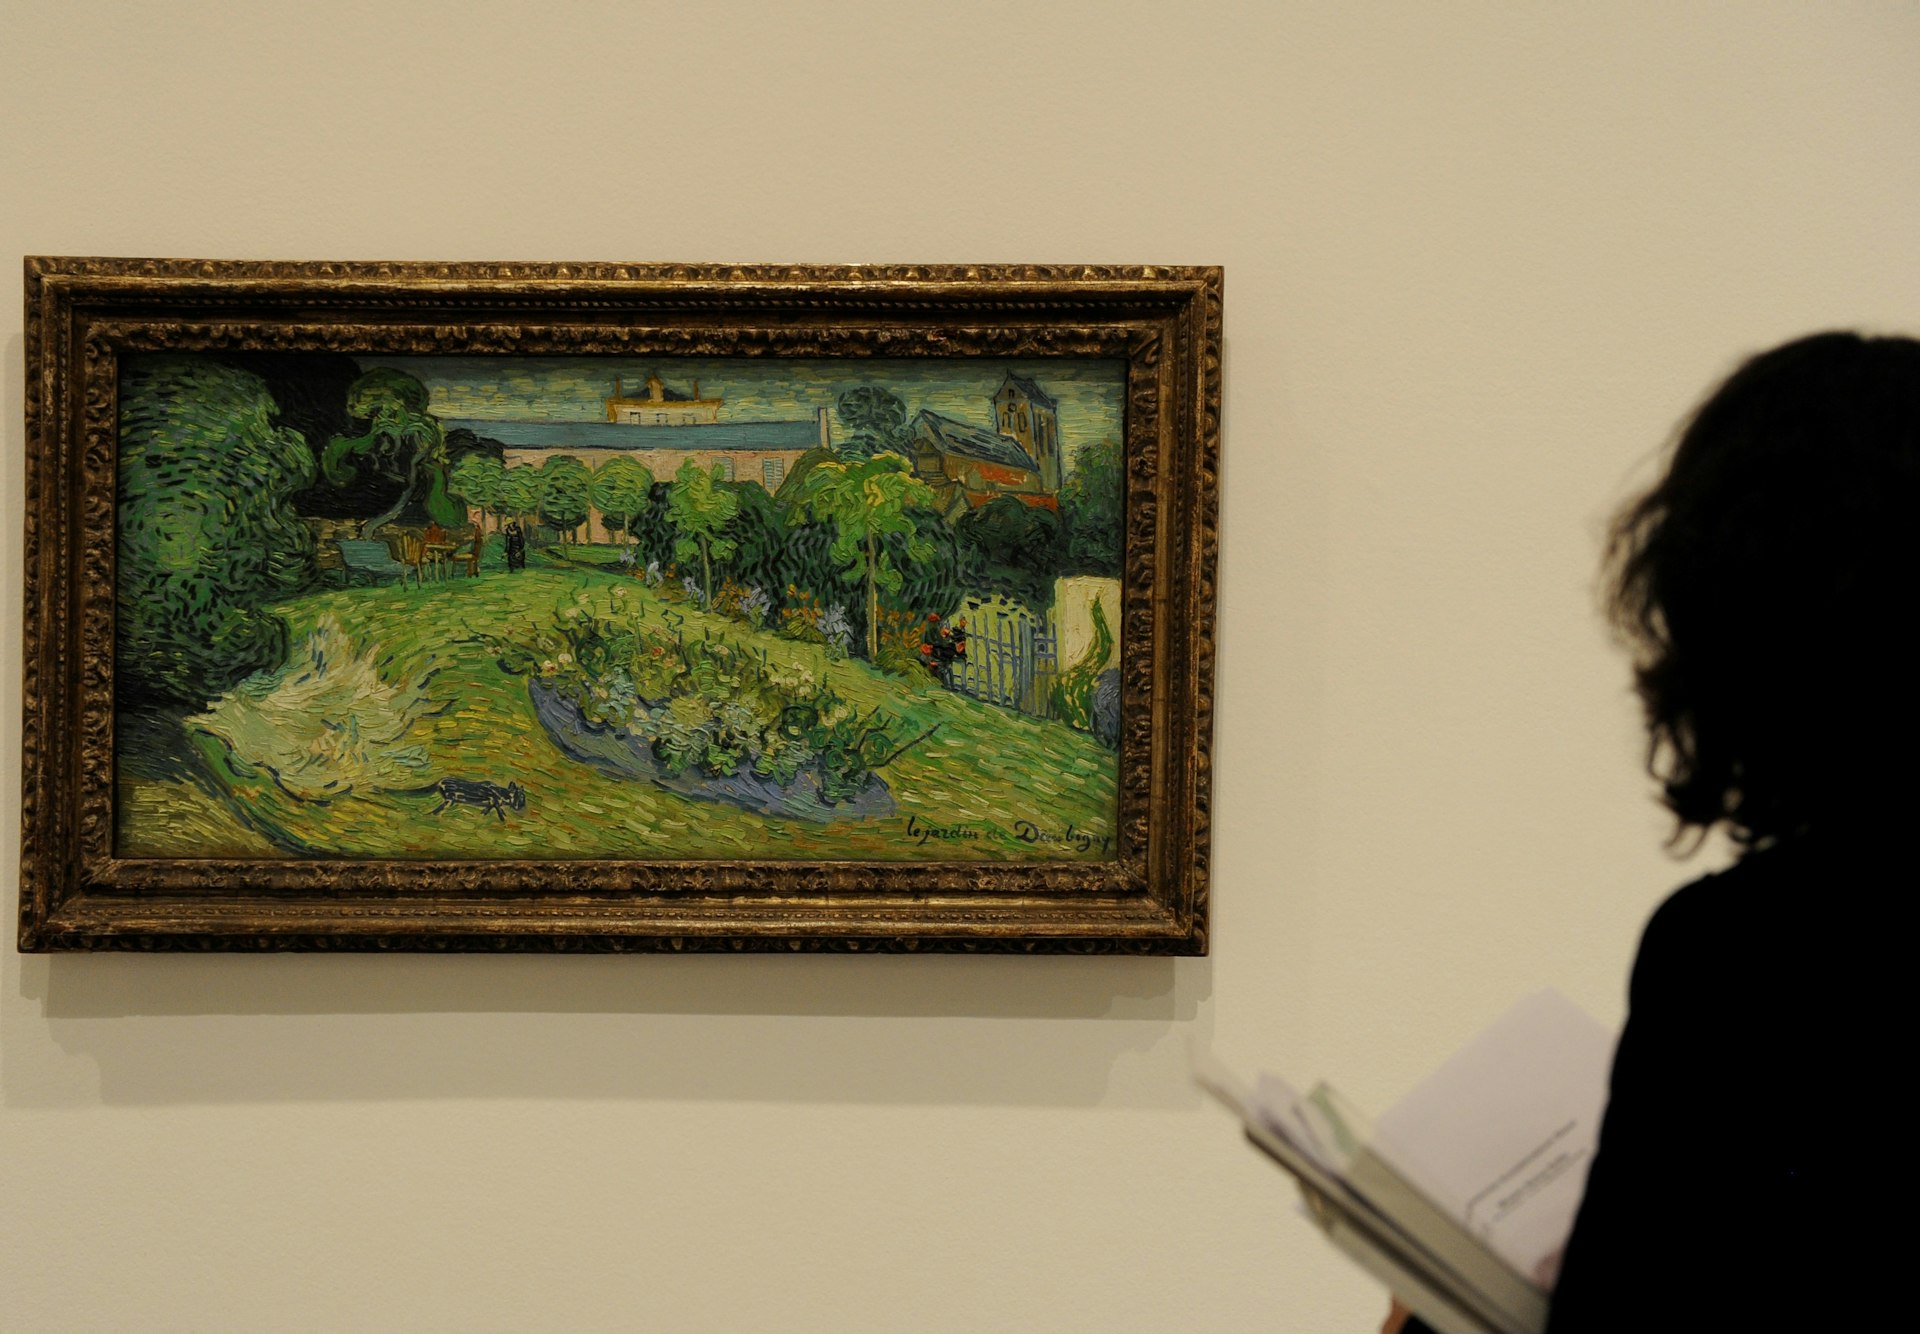 A visitor looks at the painting 'Le jardin de Daubigny' by Vincent van Gogh, which is on display at the Kunstmuseum Basel.